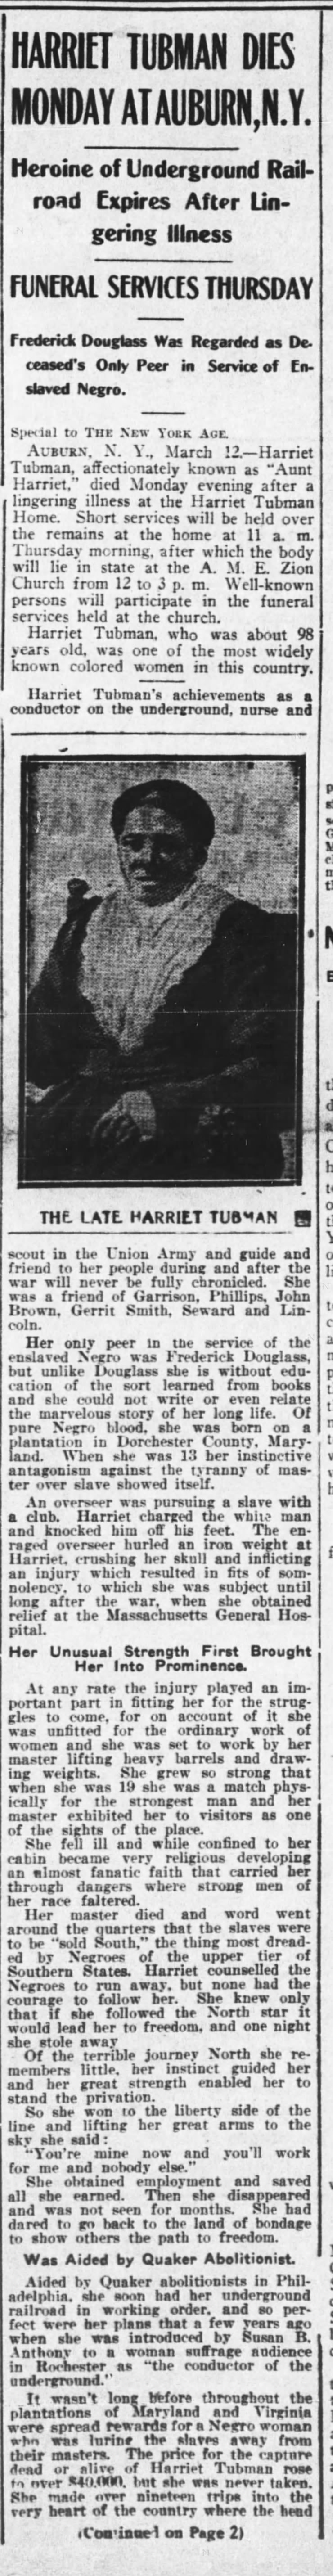 Obituary for Harriet Tubman published in the New York Age